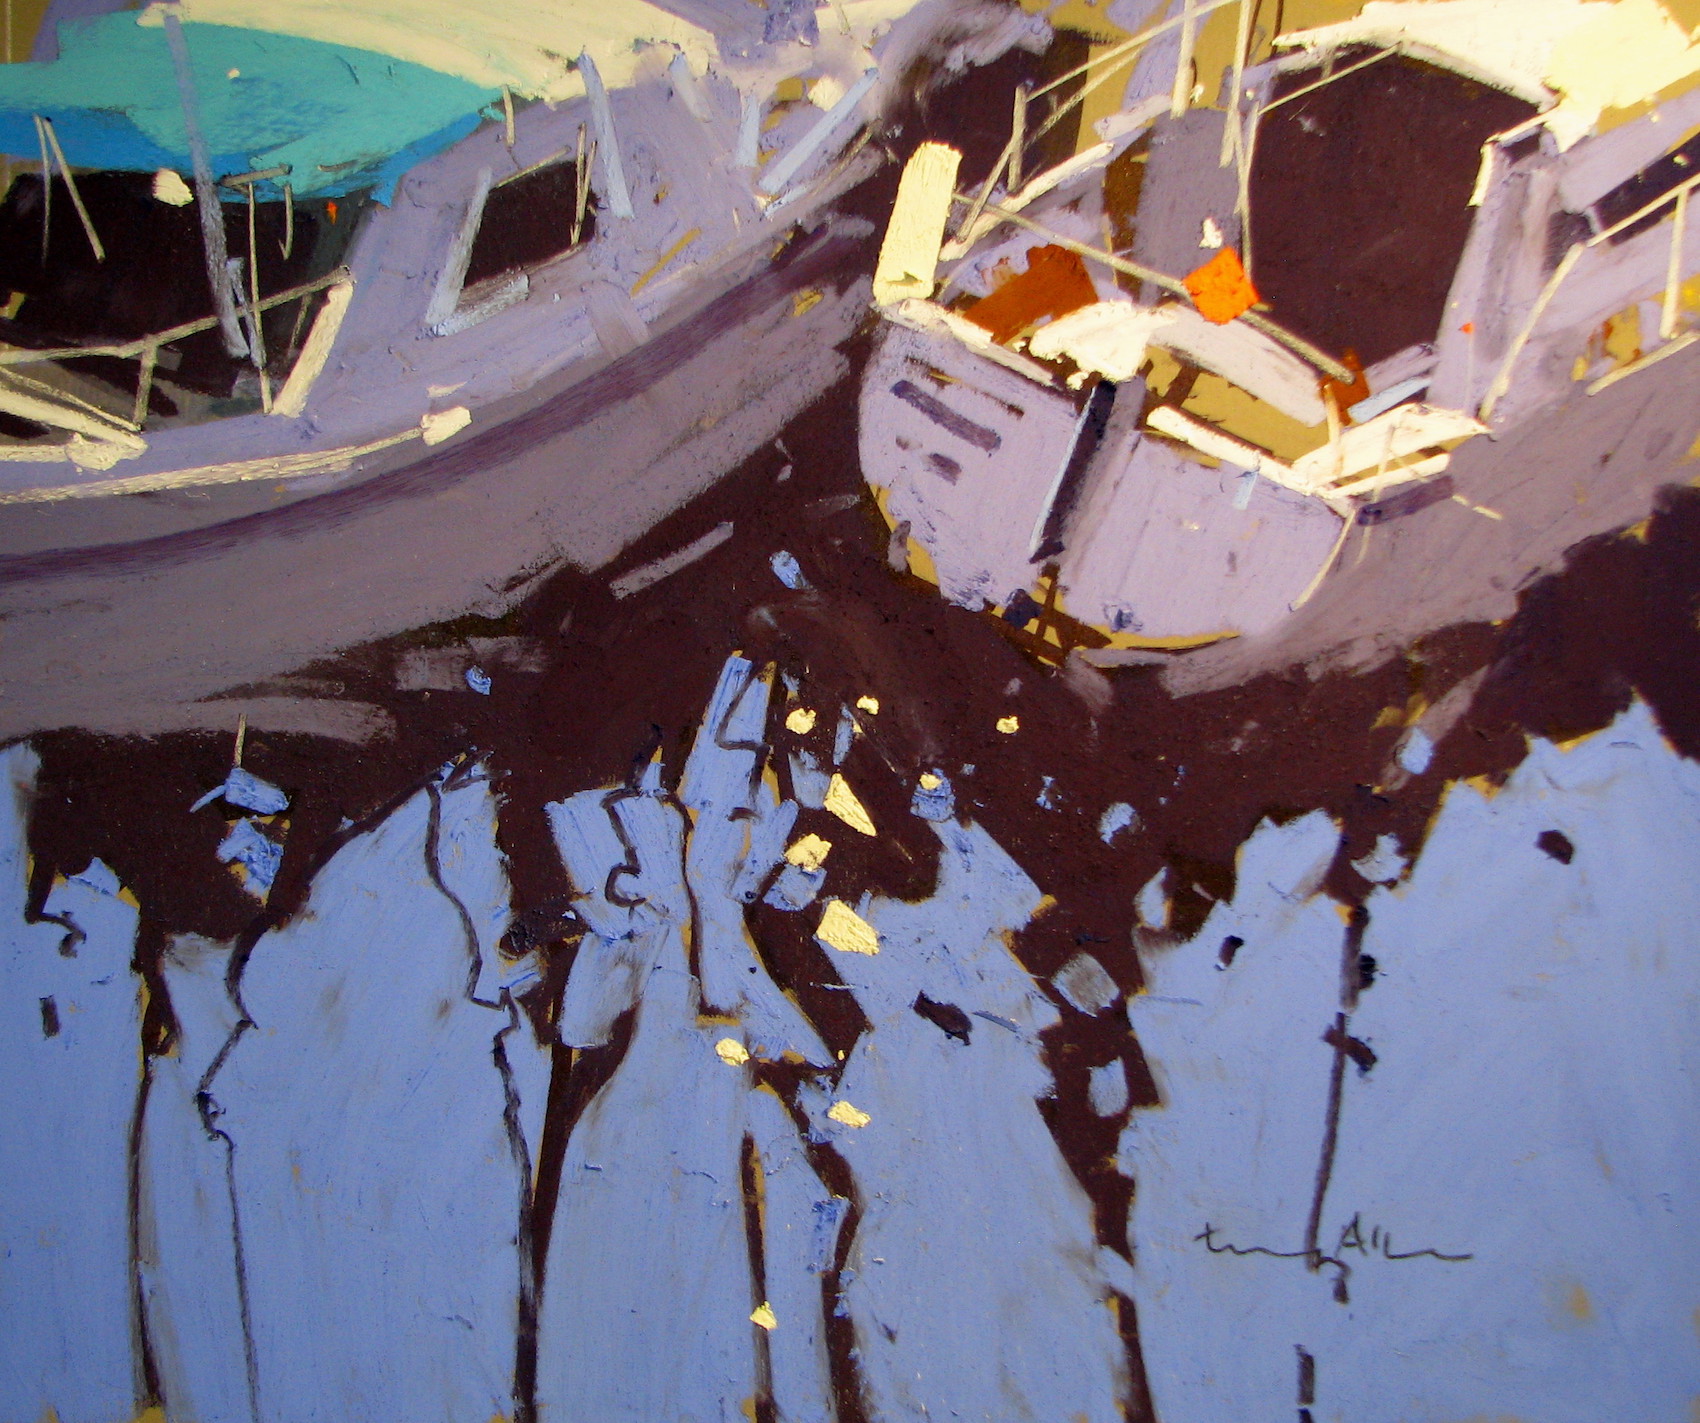 Tony Allain, "Marina Reflections," 2014, pastel on Pastel Premier paper, 10 x 14 in 